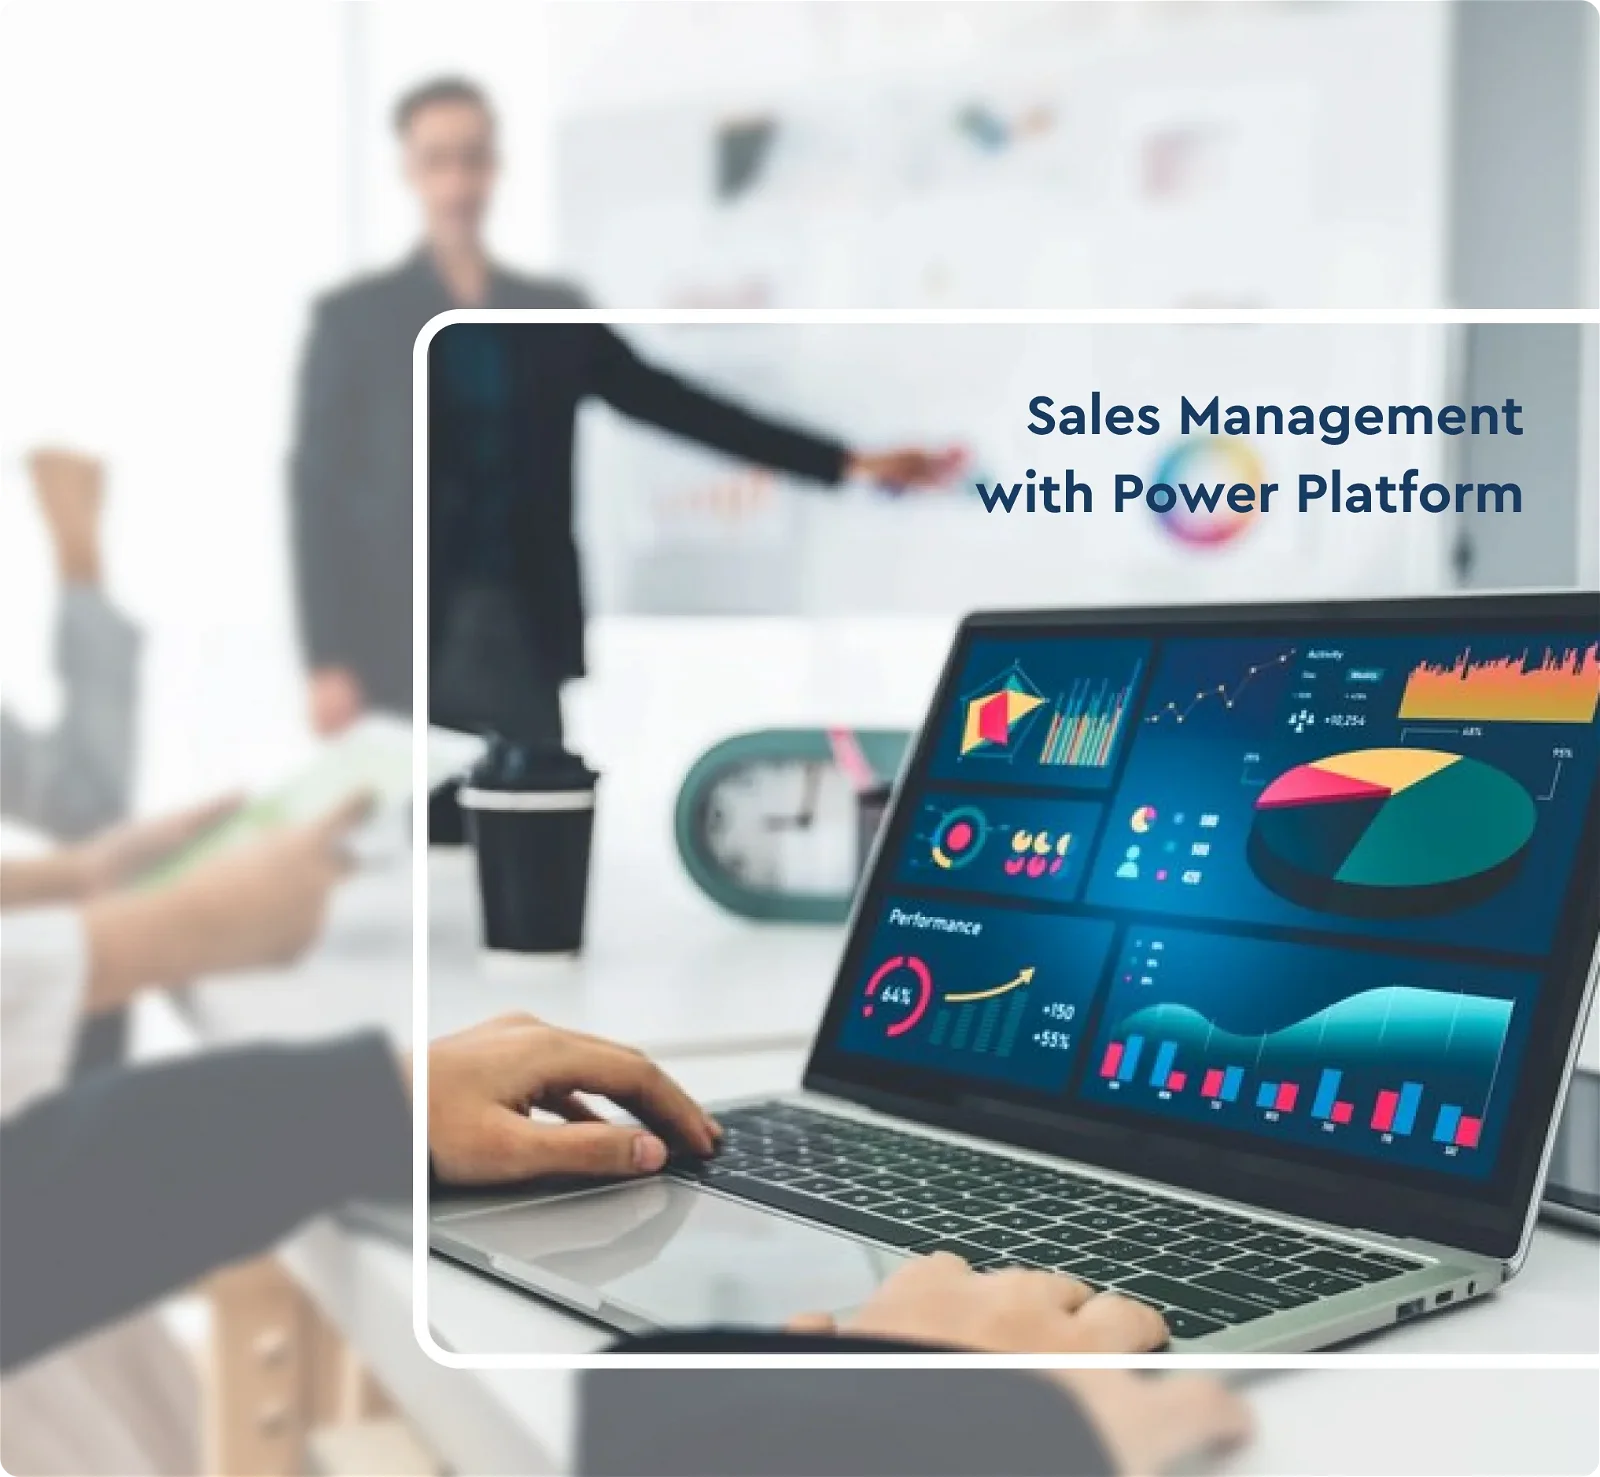 Automating Sales Management with Power Platform